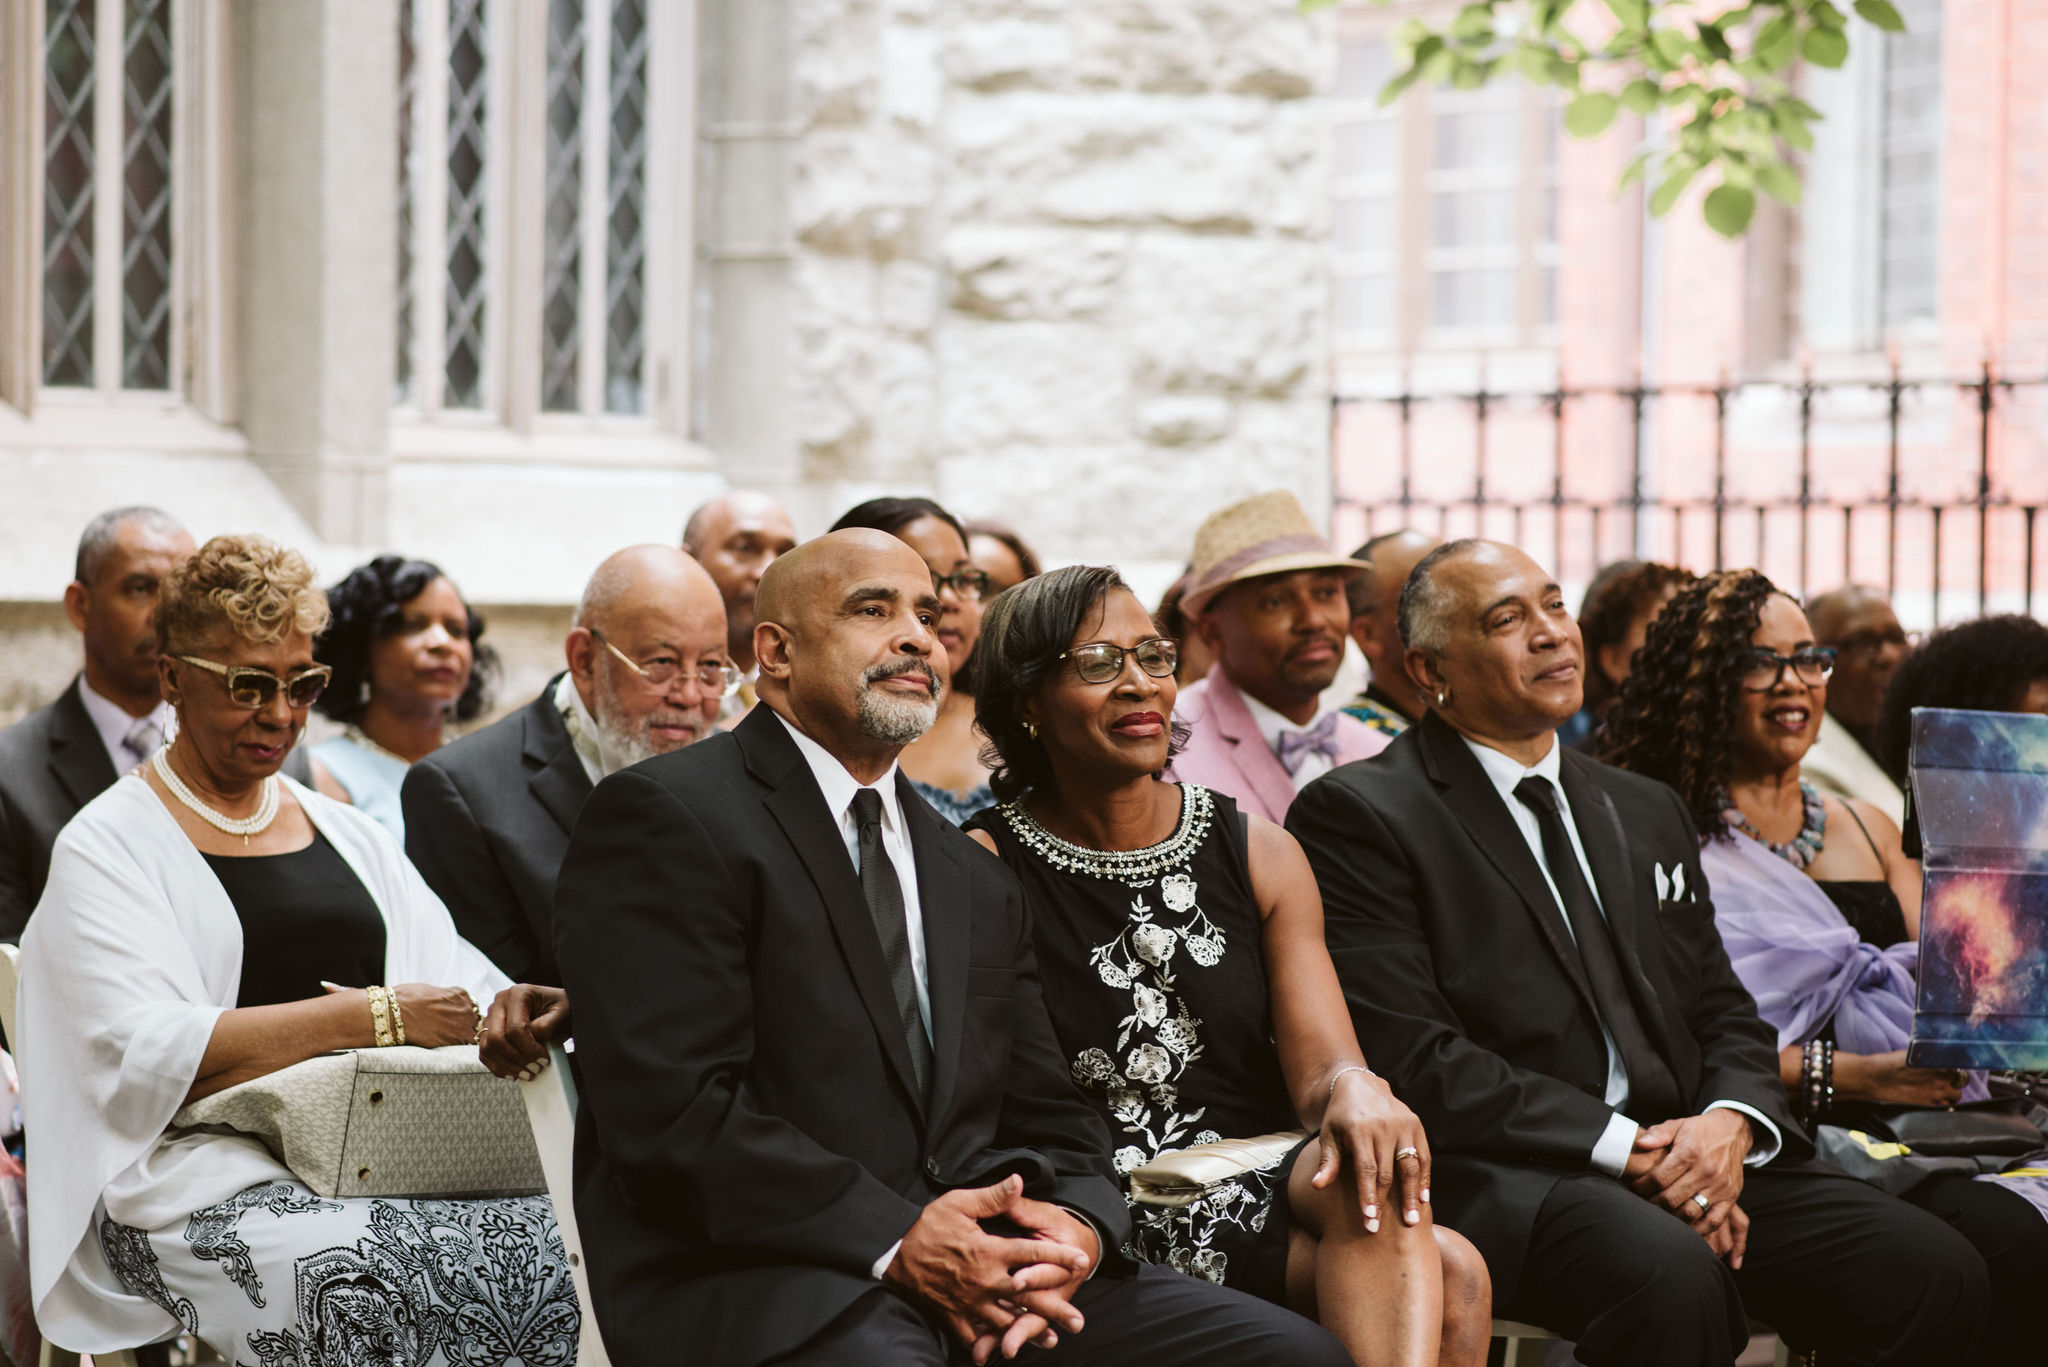  Baltimore, Maryland Wedding Photographer, Mount Vernon, Chase Court, Classic, Outdoor Ceremony, Garden, Romantic, Wedding Guests Smiling and Watching Ceremony 